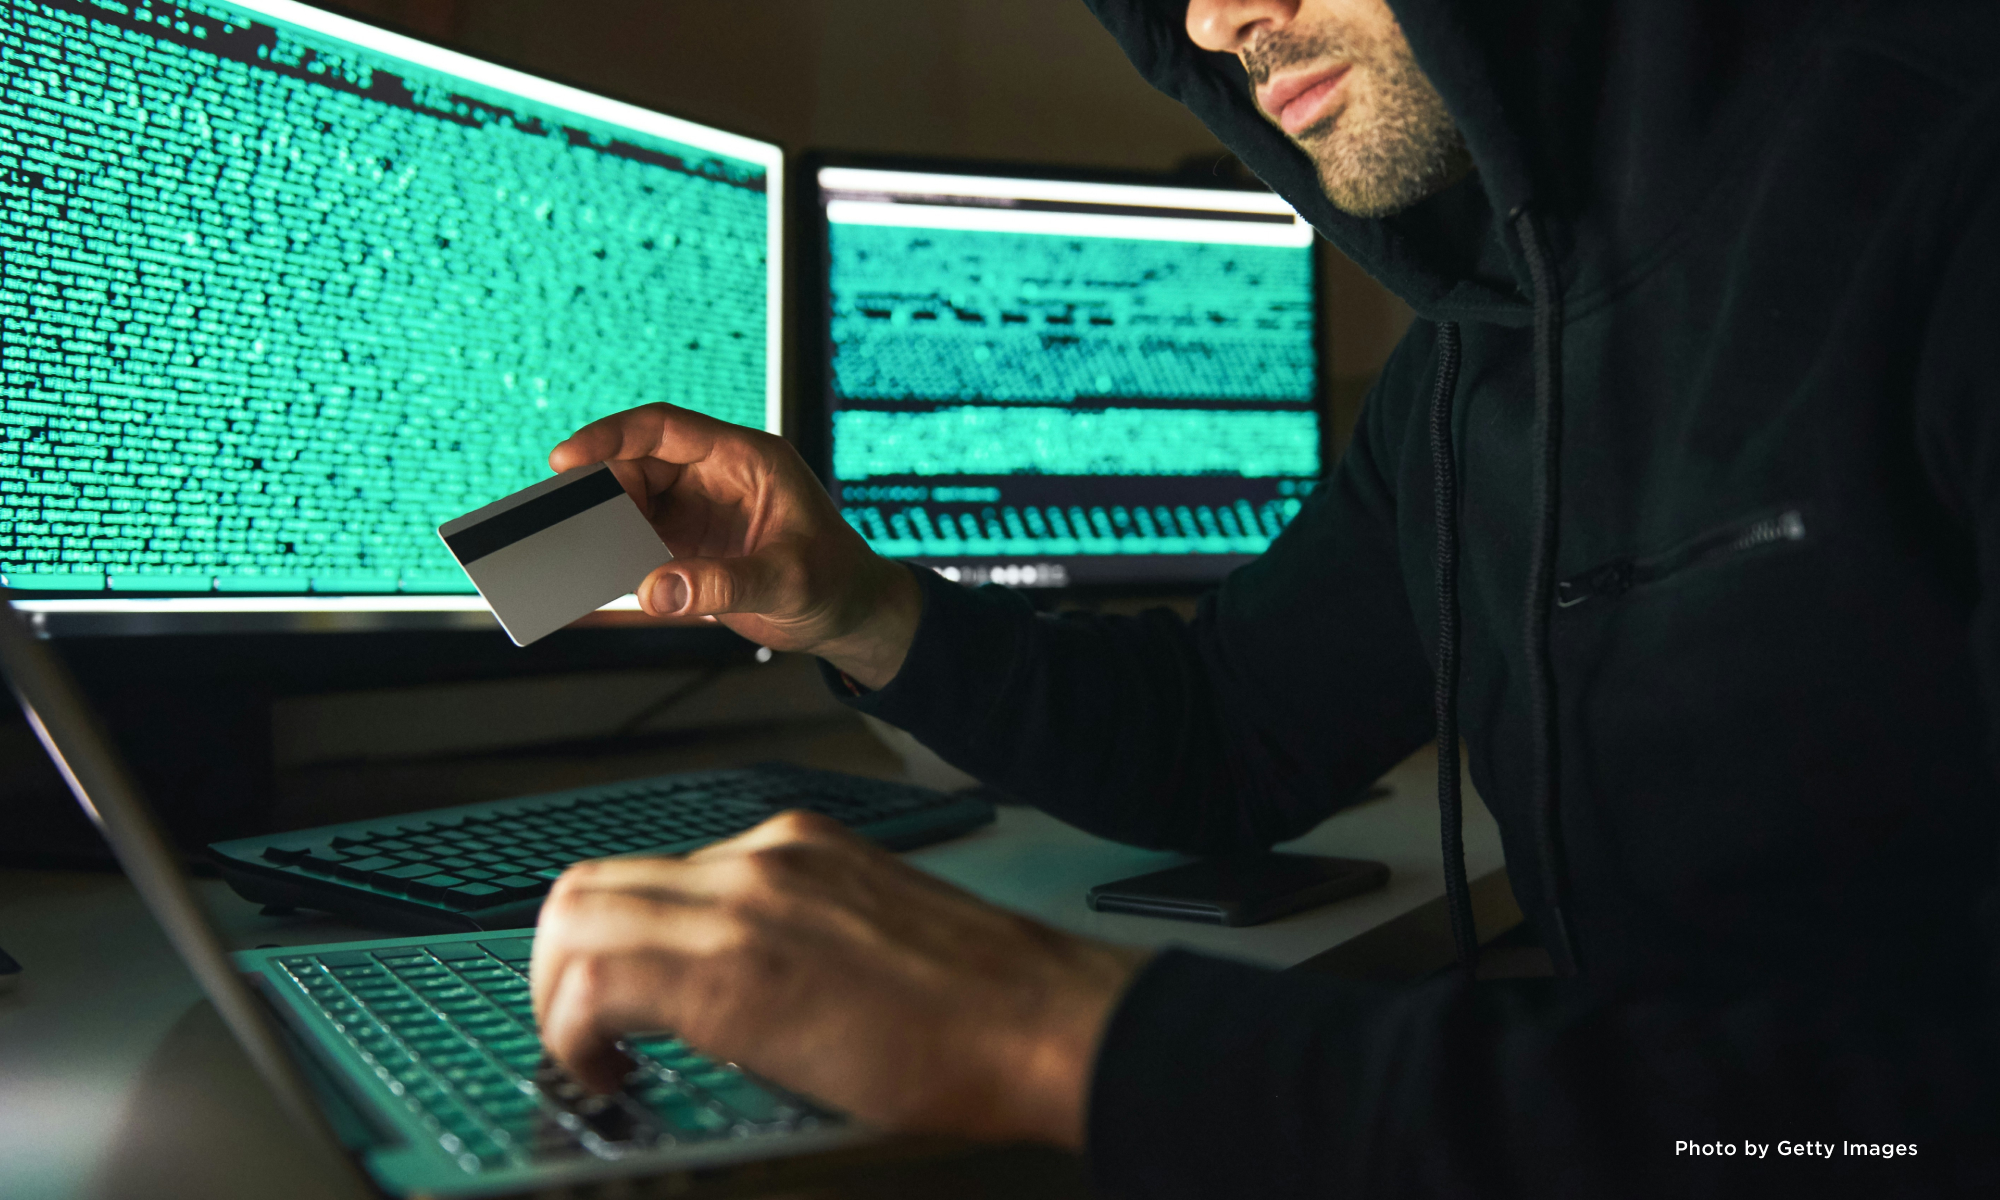 A hacker sitting in front of a computer screen holding a credit card.